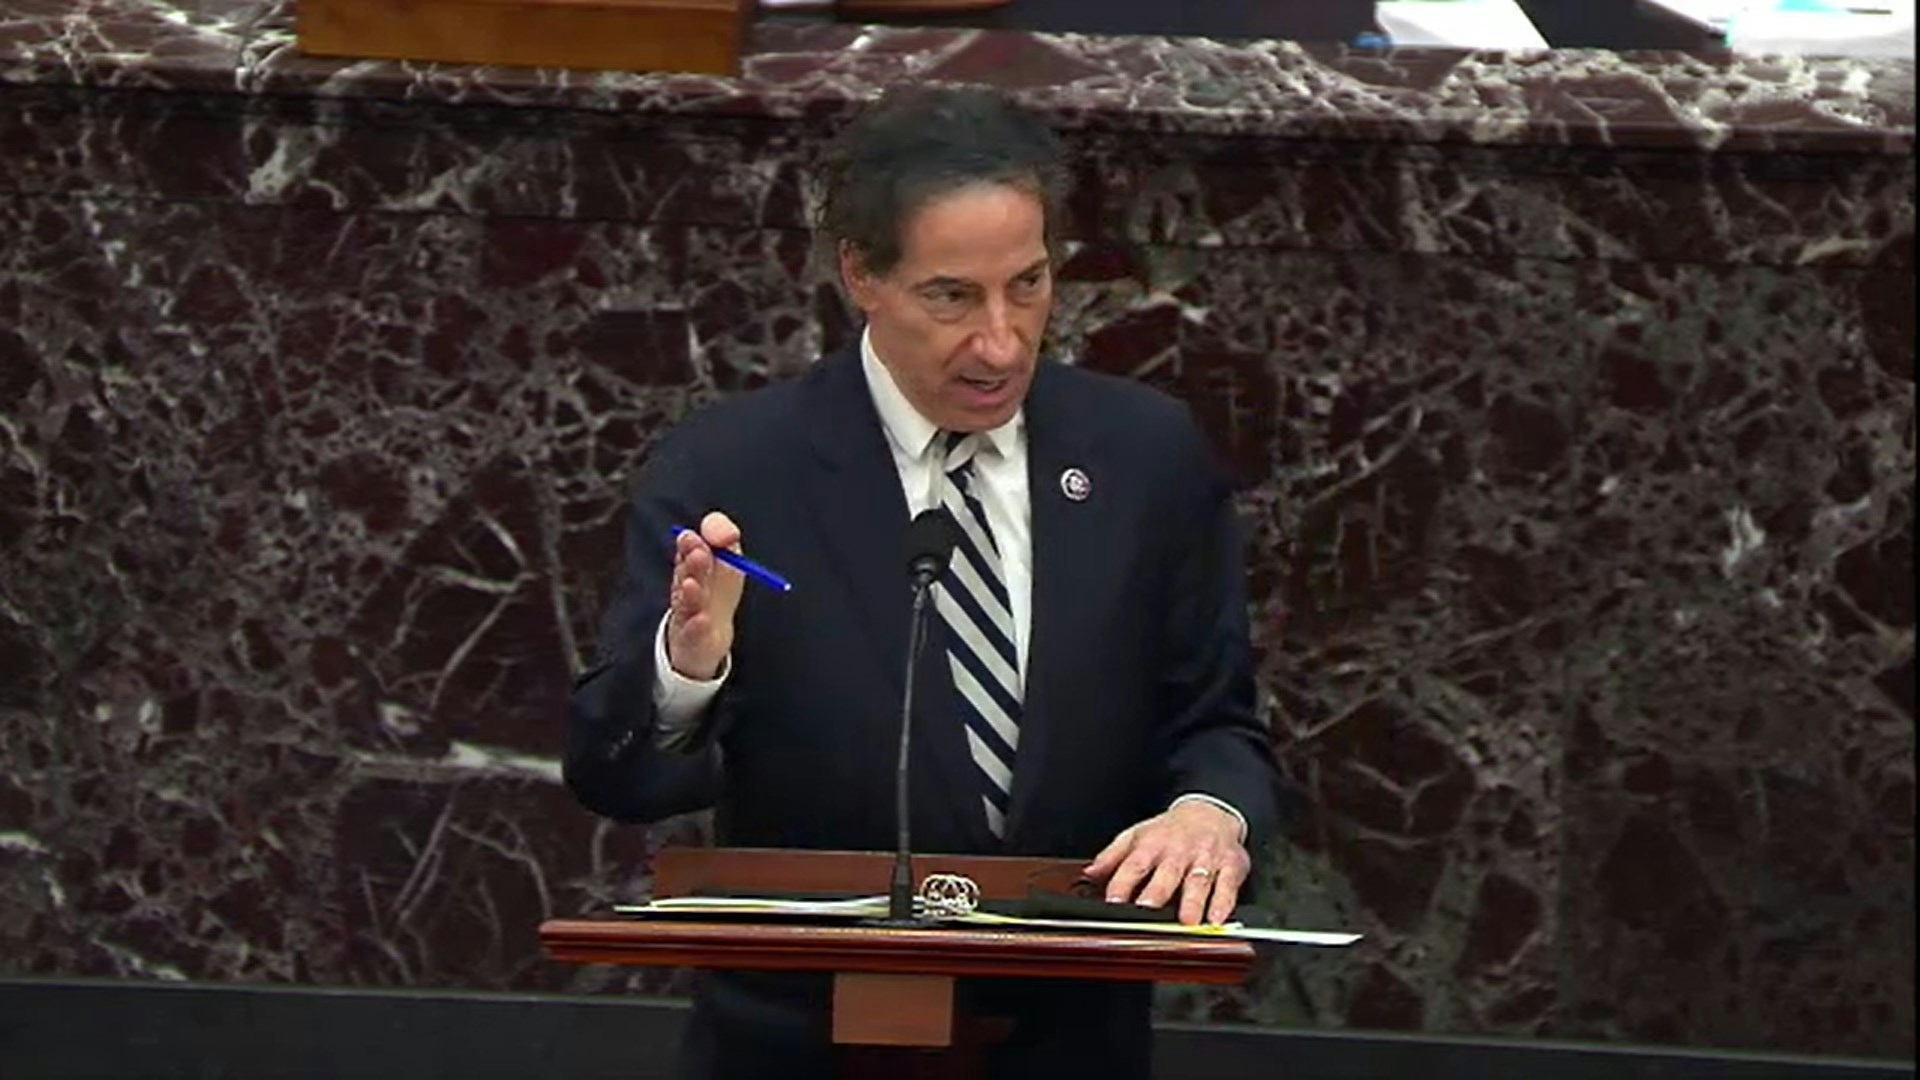 Lead Impeachment Manager Rep. Jamie Raskin (D-MD) speaks on the third day of former President Donald Trump's second impeachment trial at the U.S. Capitol.